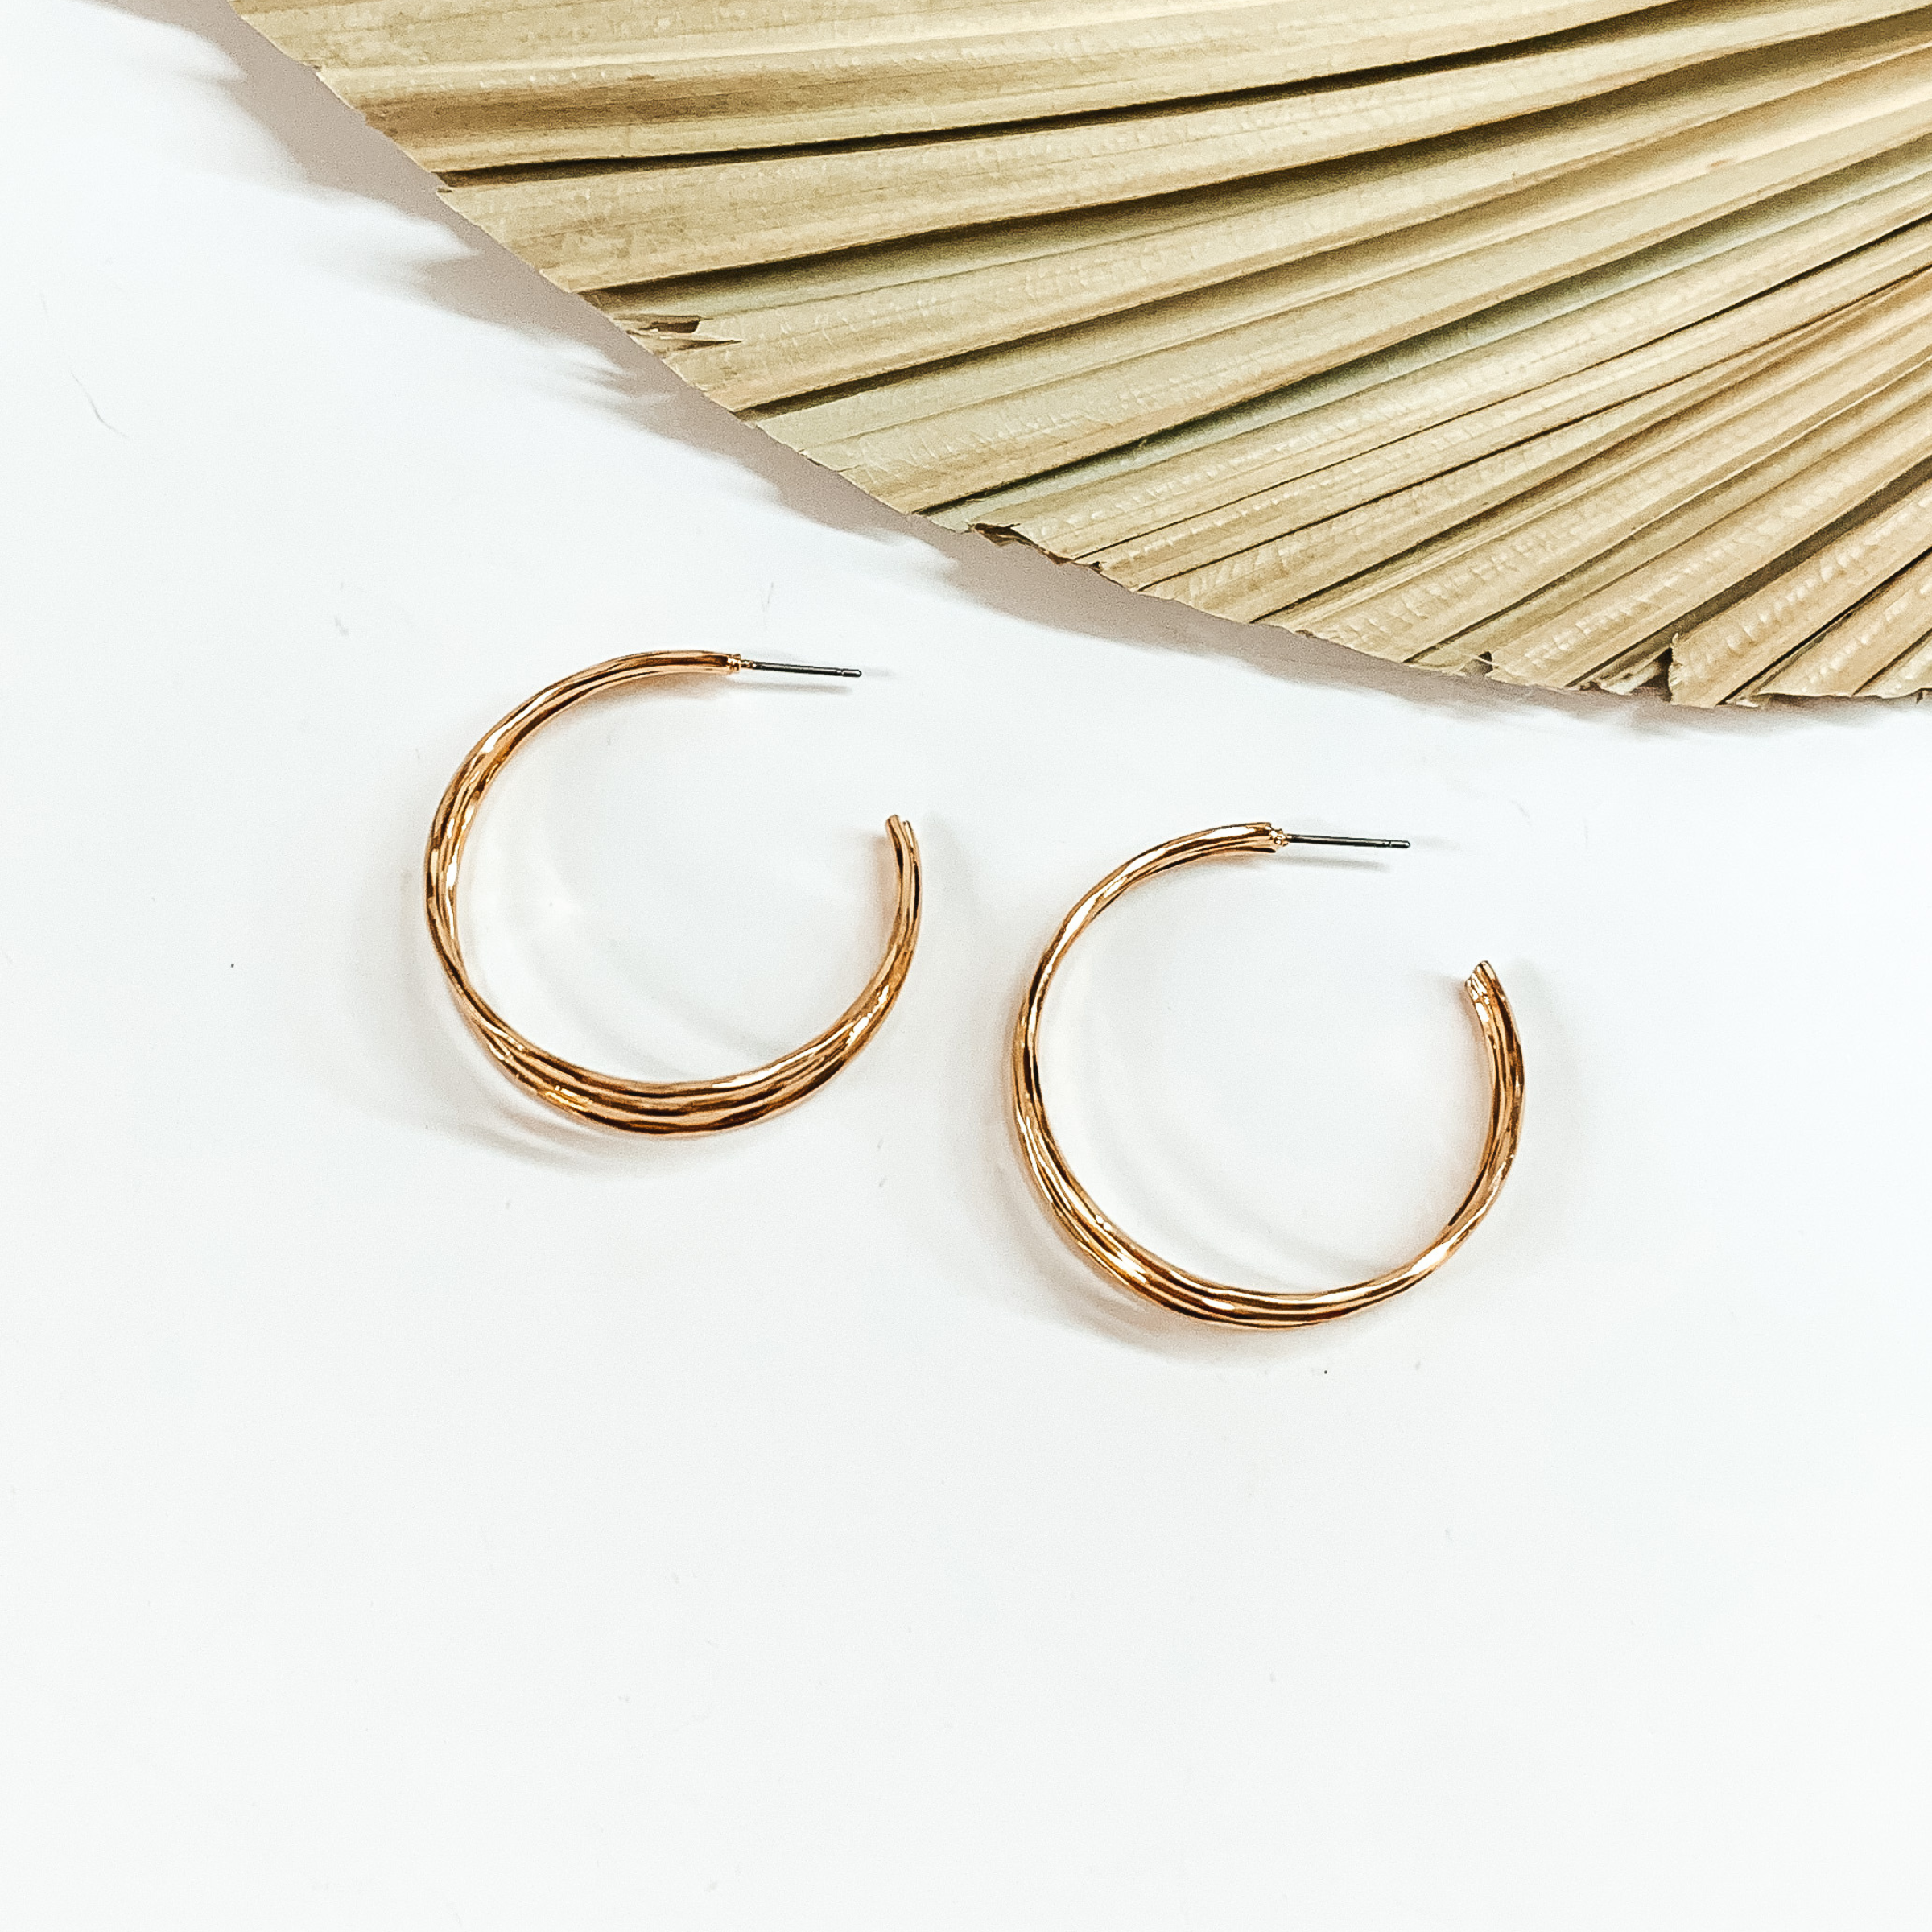 Good Karma Large Triple Hoop Earrings in Gold Tone - Giddy Up Glamour Boutique